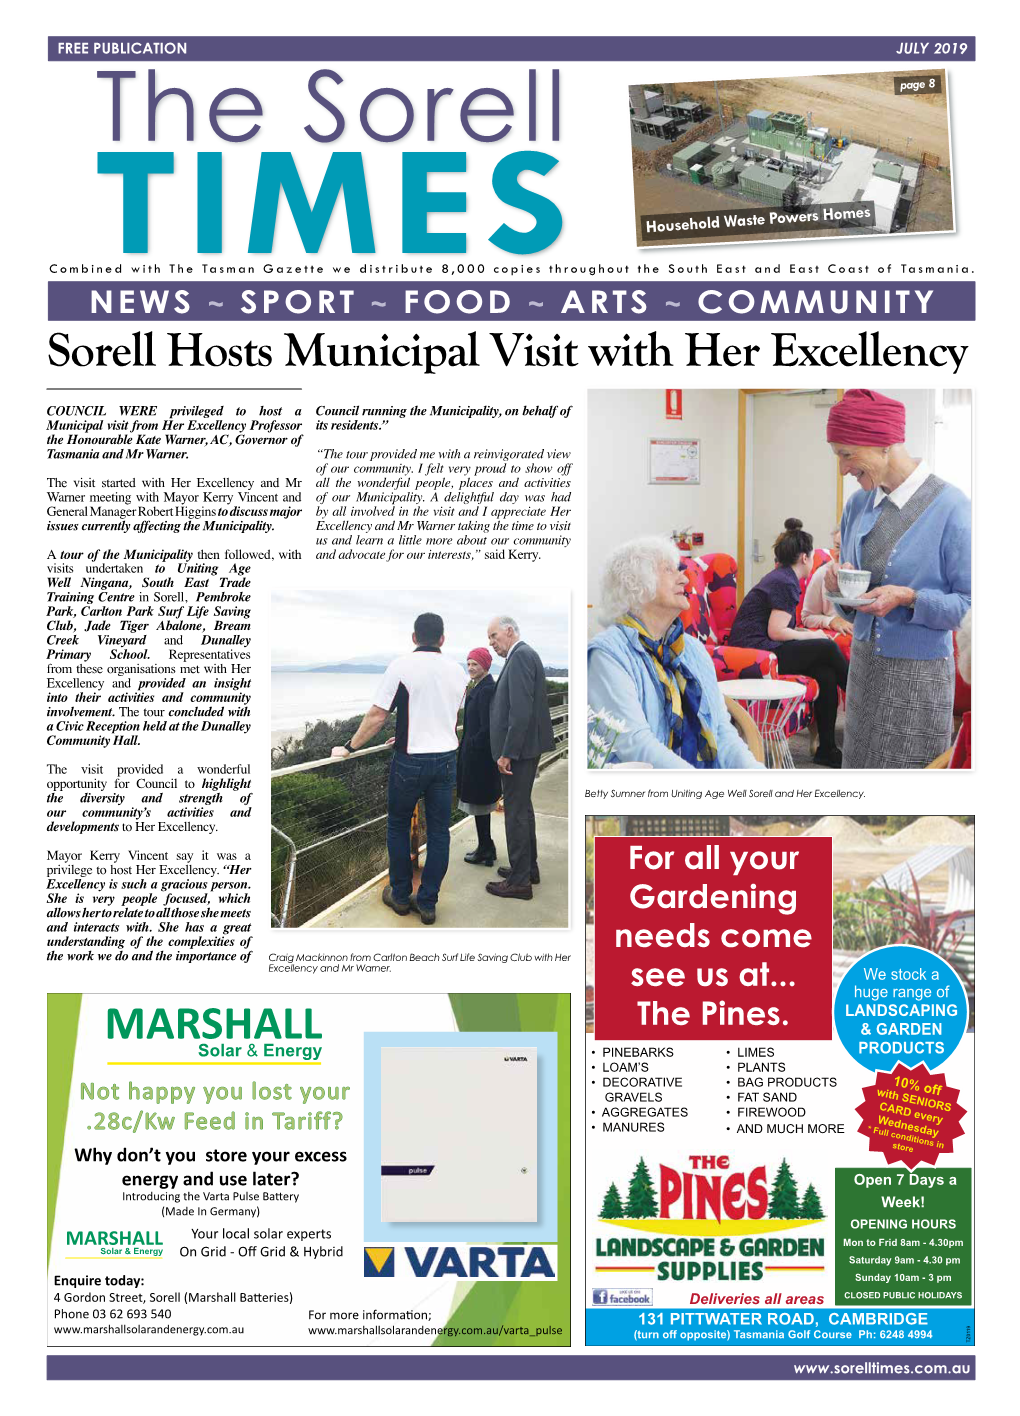 Sorell Hosts Municipal Visit with Her Excellency